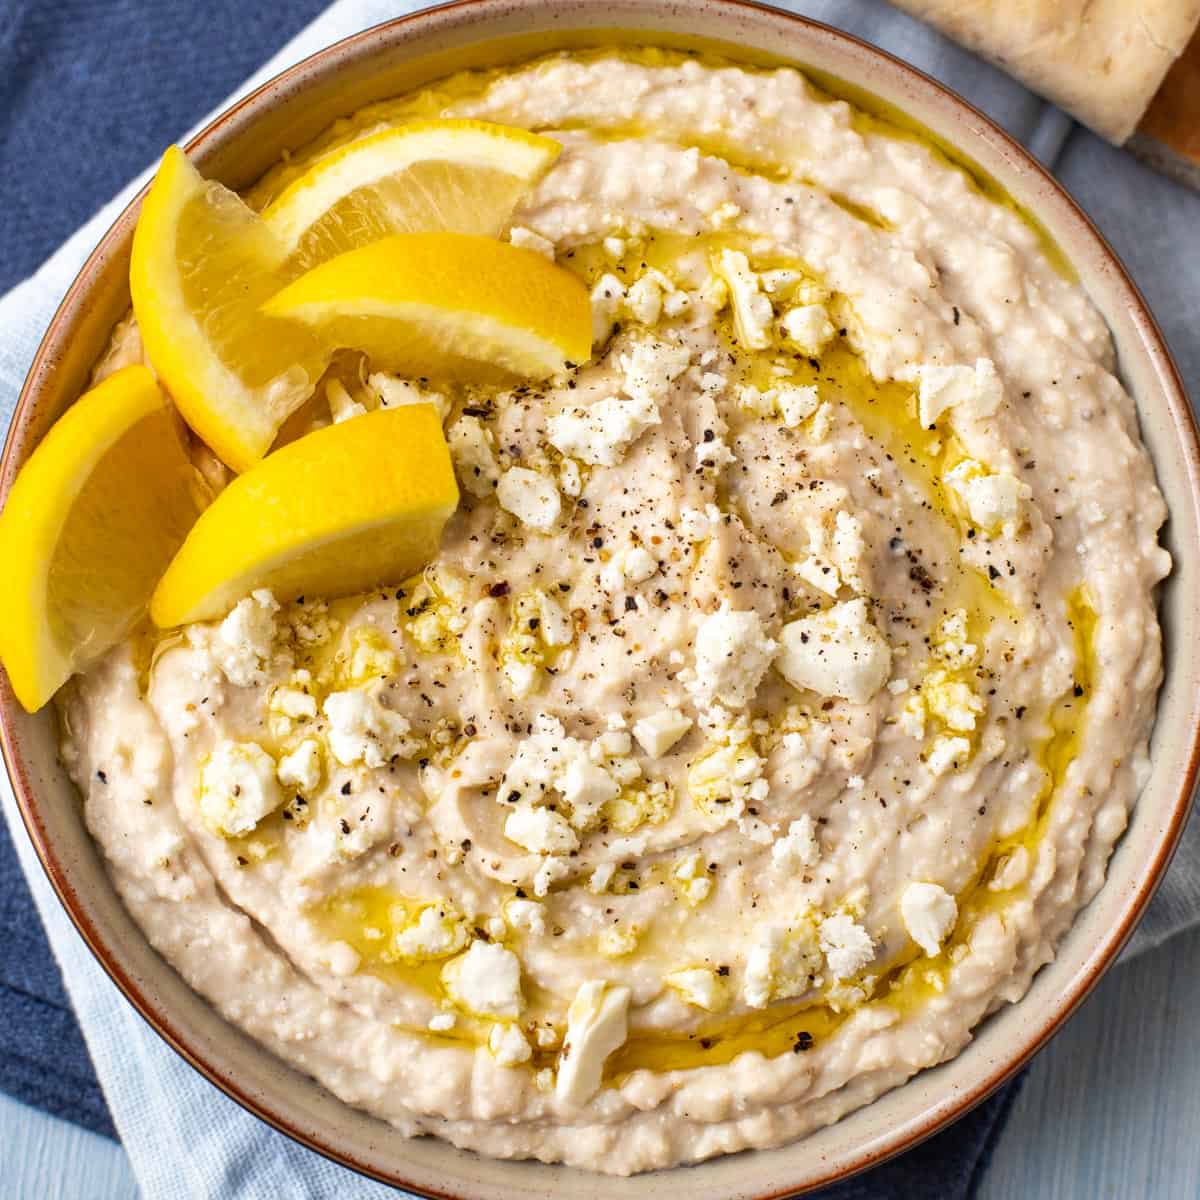 White bean hummus topped with lemon wedges and crumbled feta cheese.